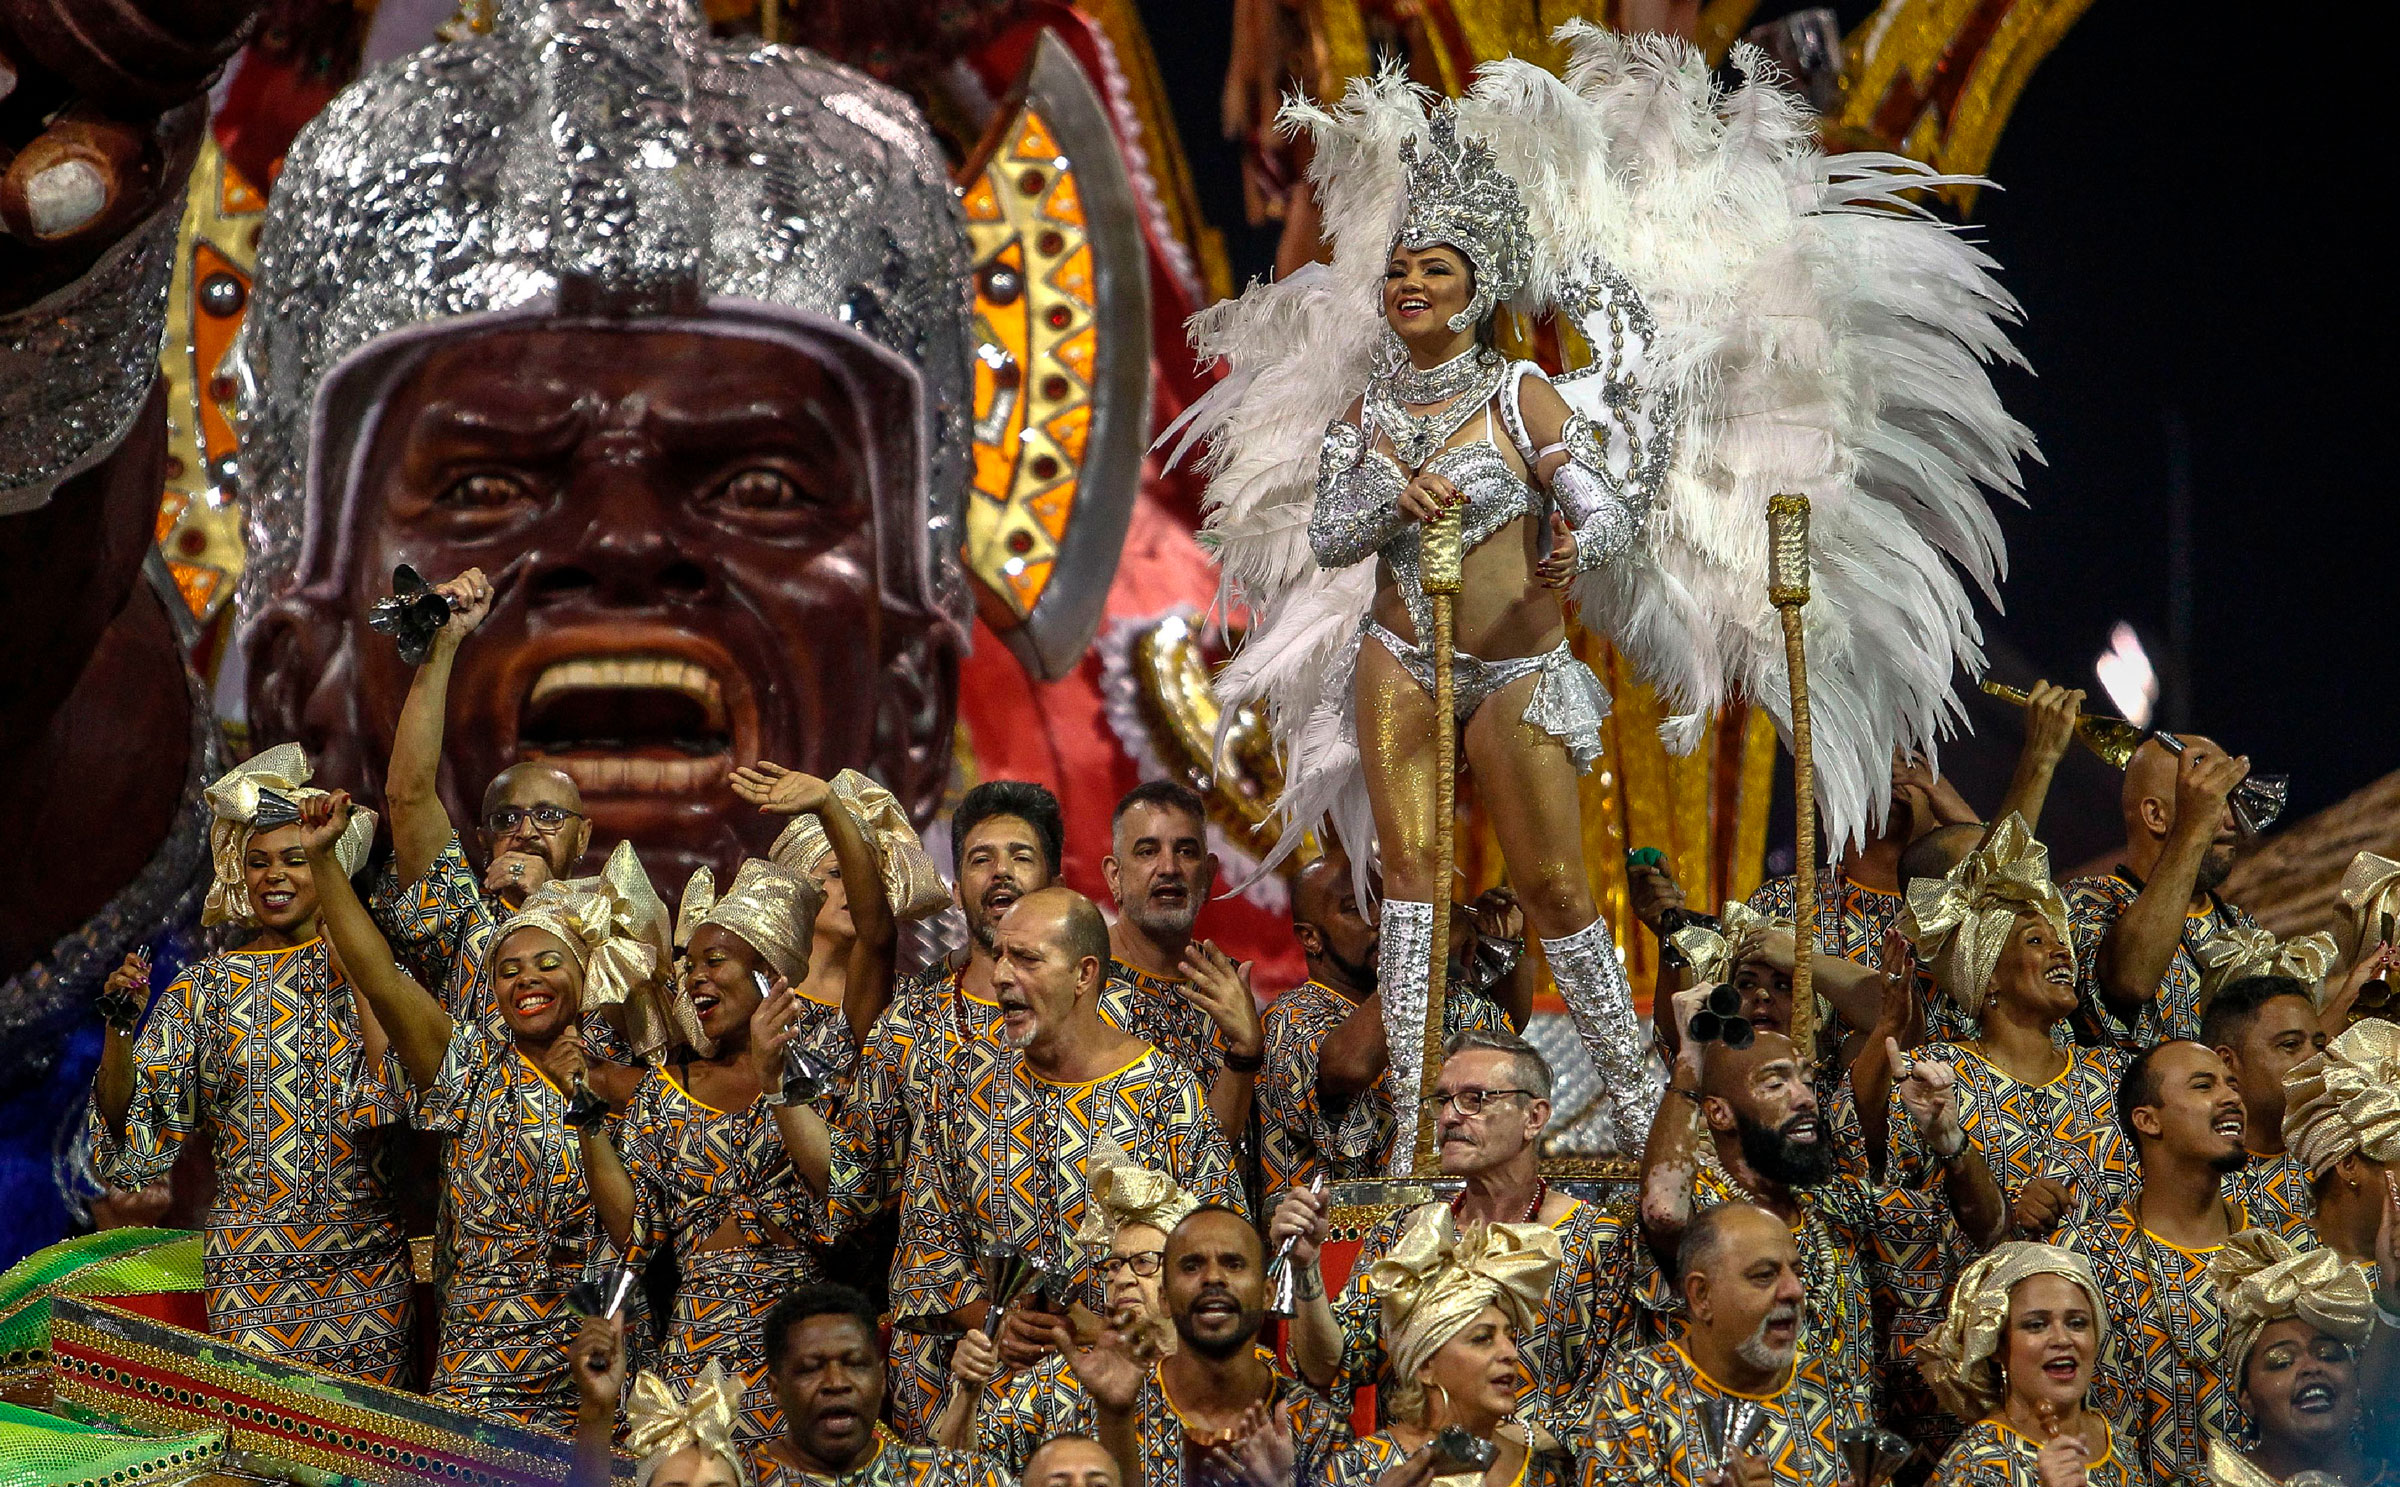 People participate in a Carnival parade in São Paulo, Brazil, in March 2019.